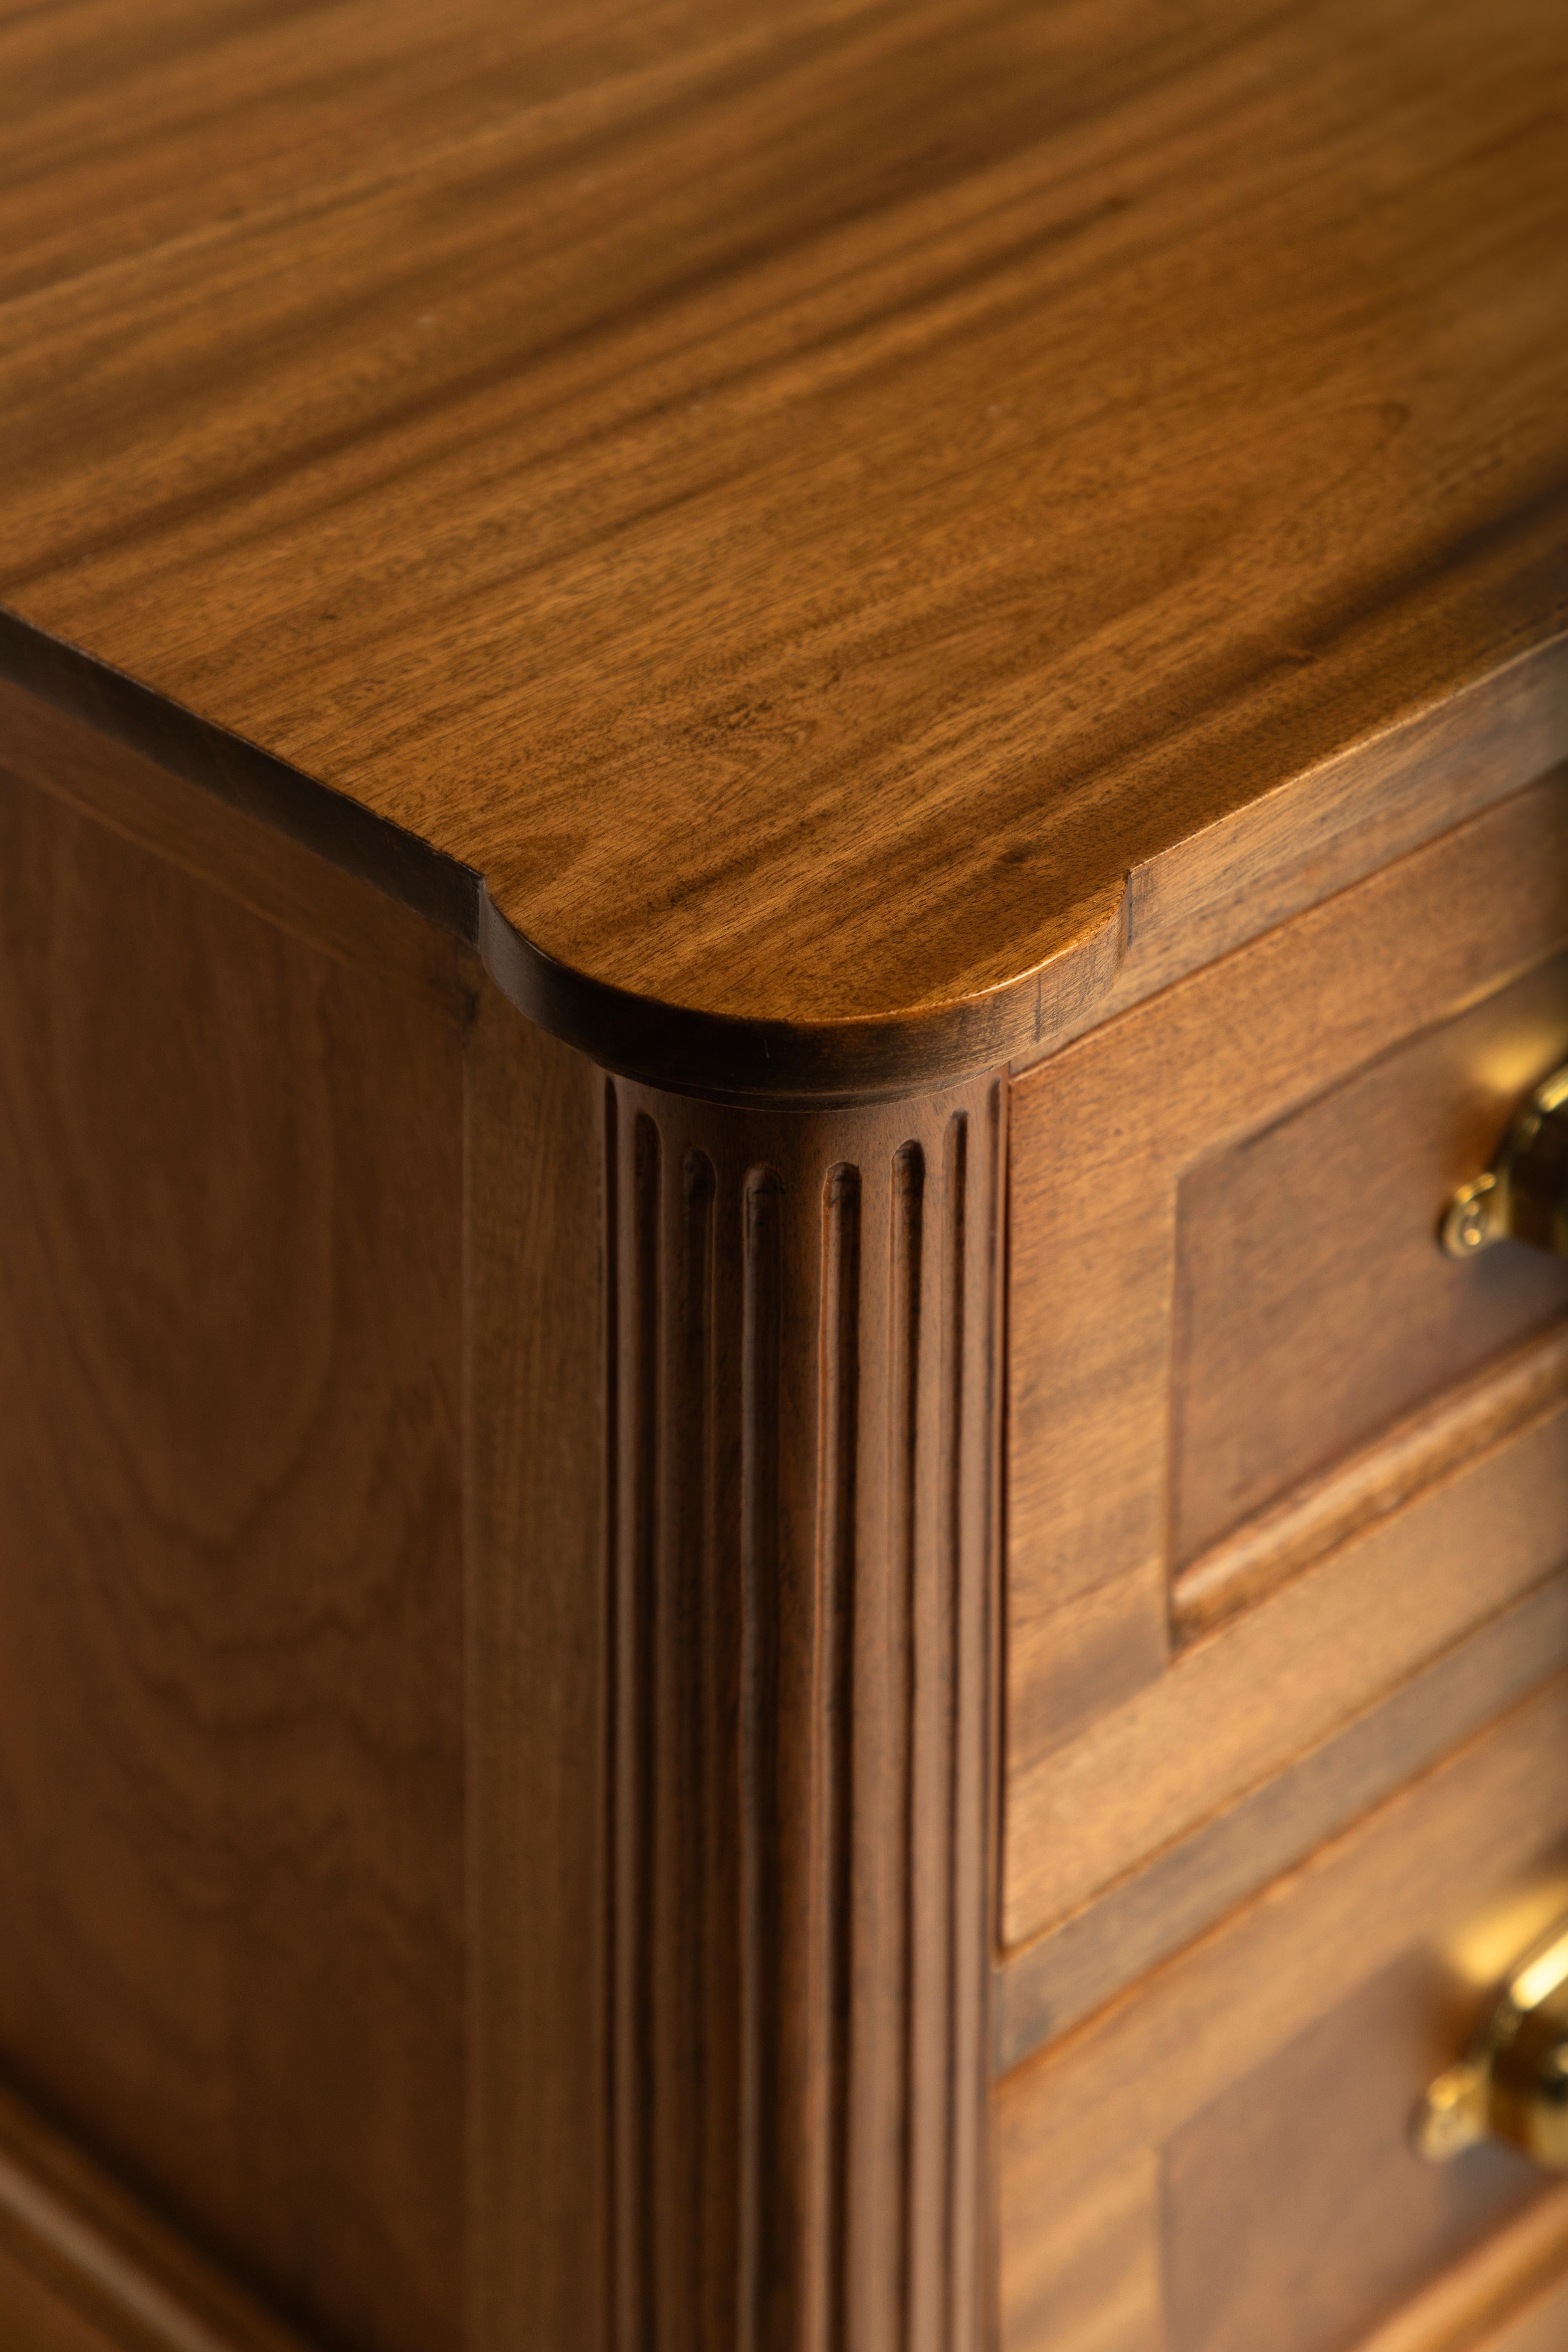 Three drawer nightstand made out of oak wood with brass details and lock on one of the nightstands.